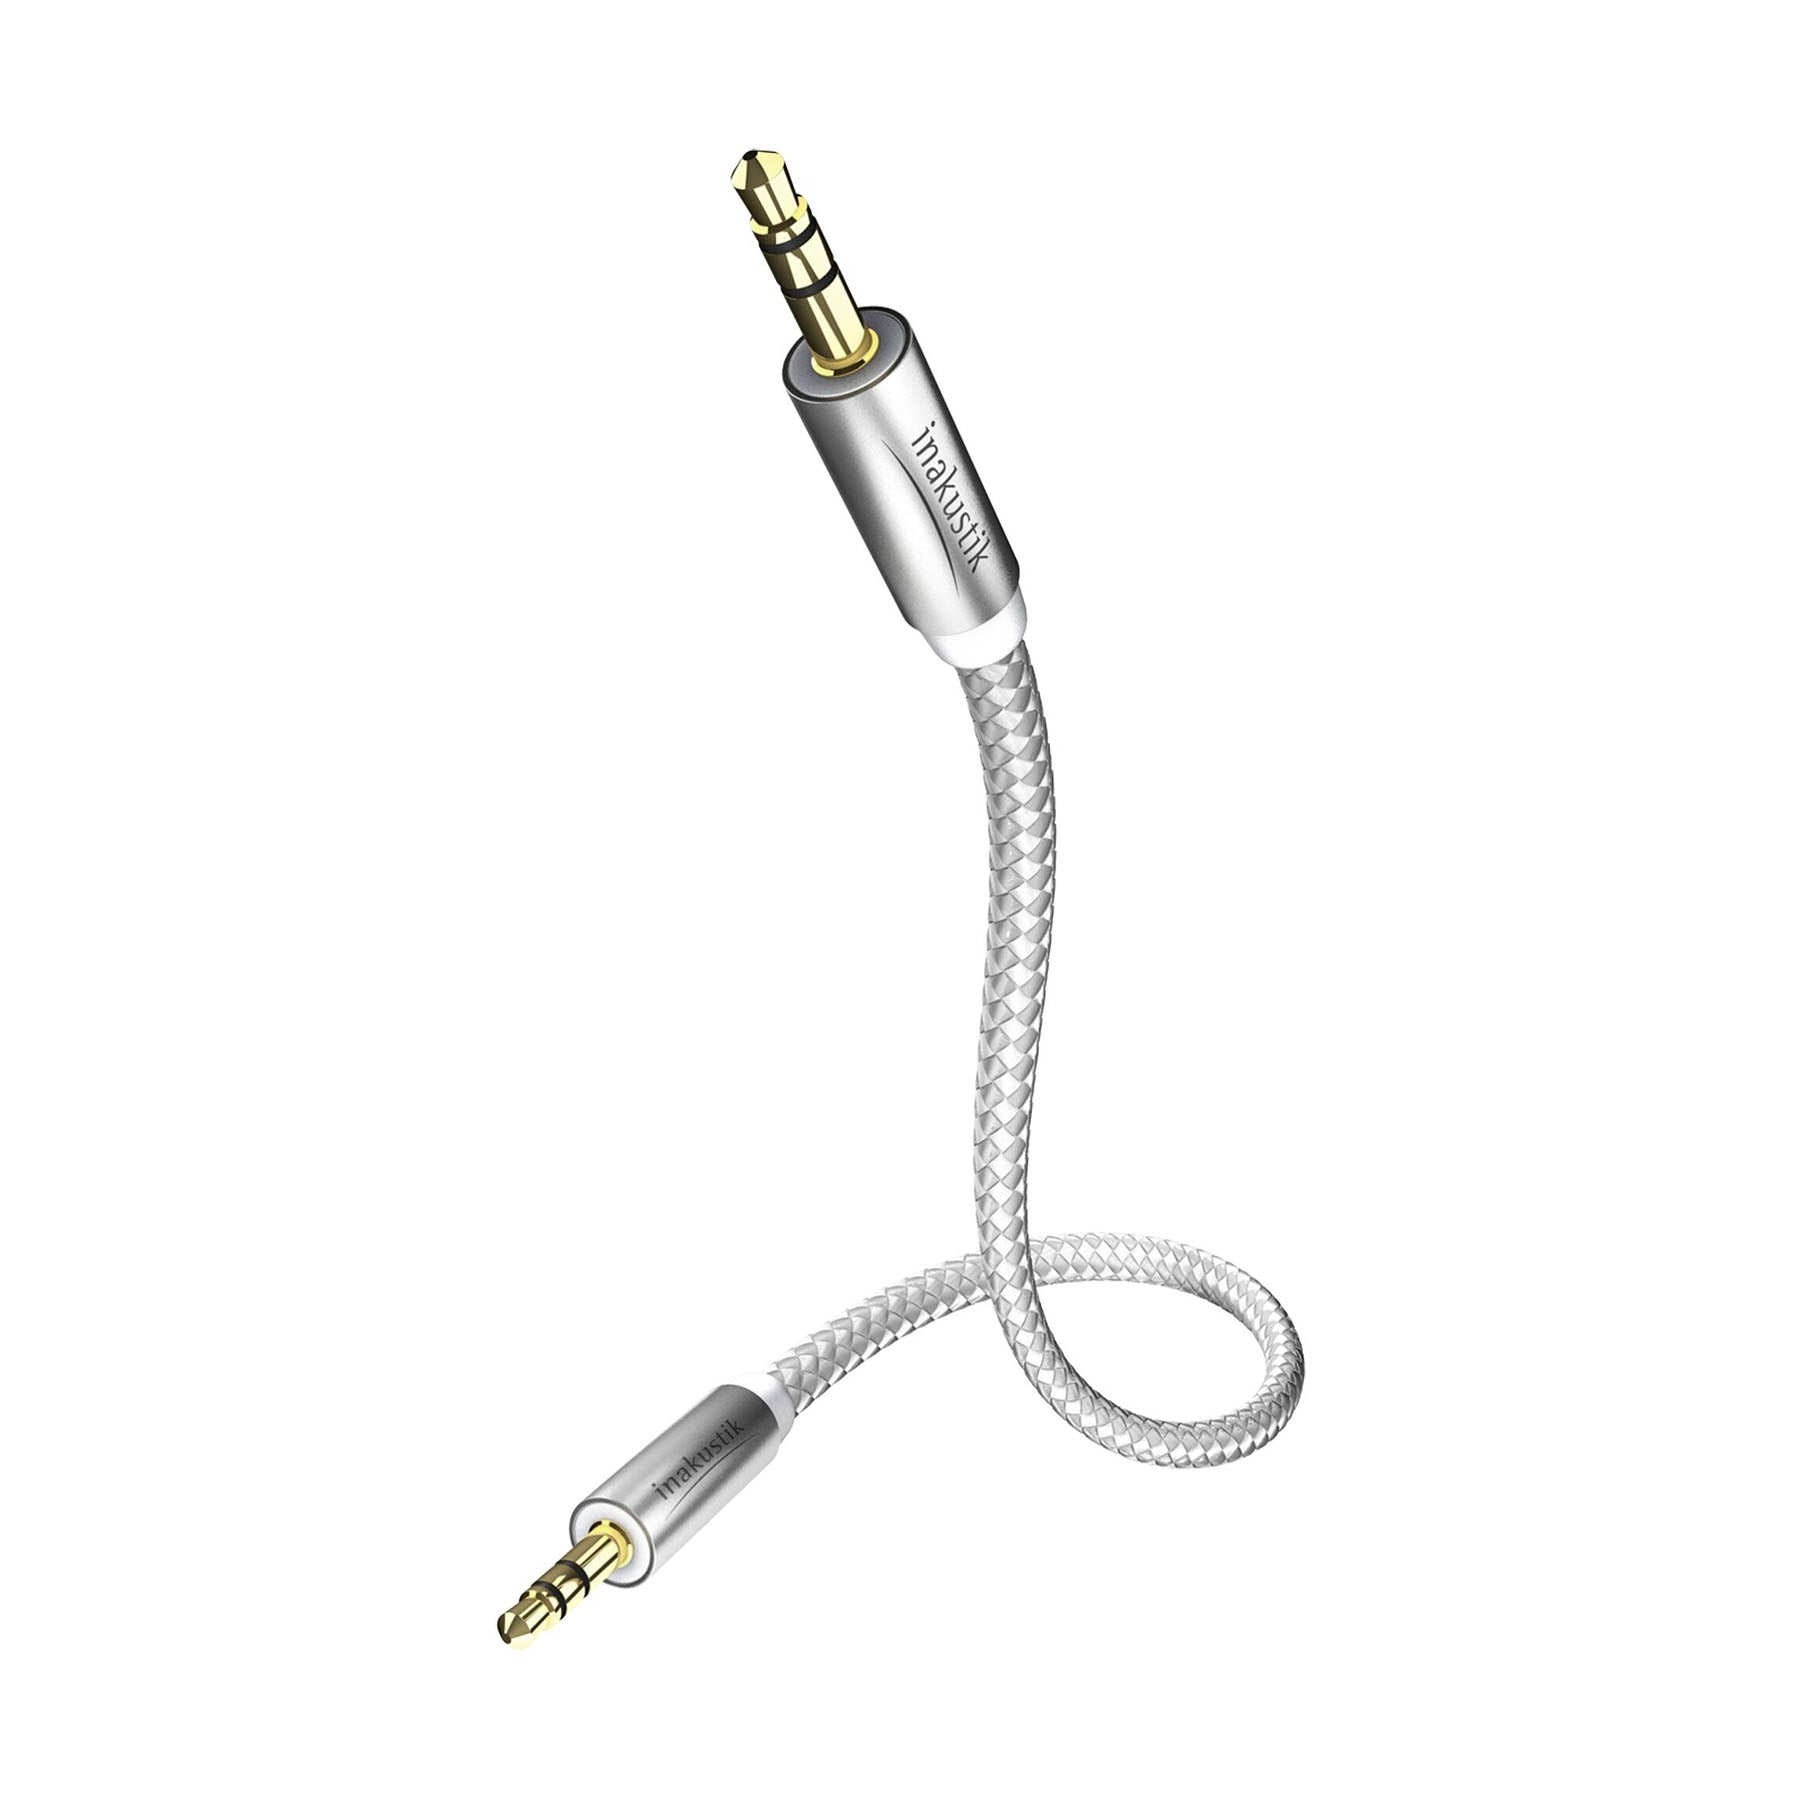 Inakustik Premium Stereo 3.5mm Male - 3.5mm Male Audio Cable